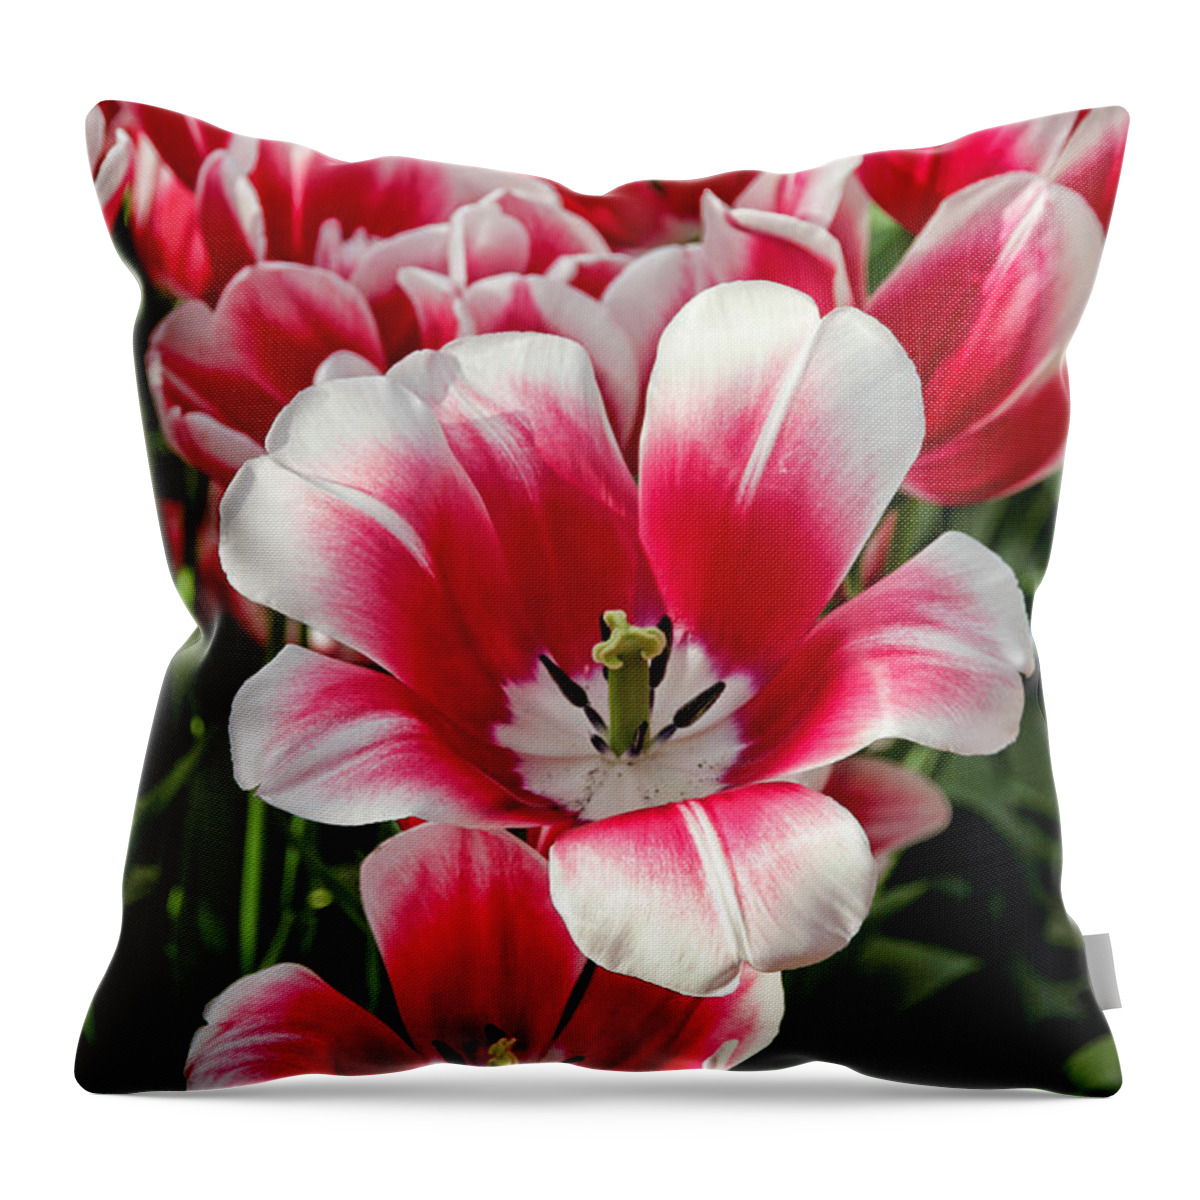 Tulip Throw Pillow featuring the photograph Tulip Annemarie by Jasna Buncic